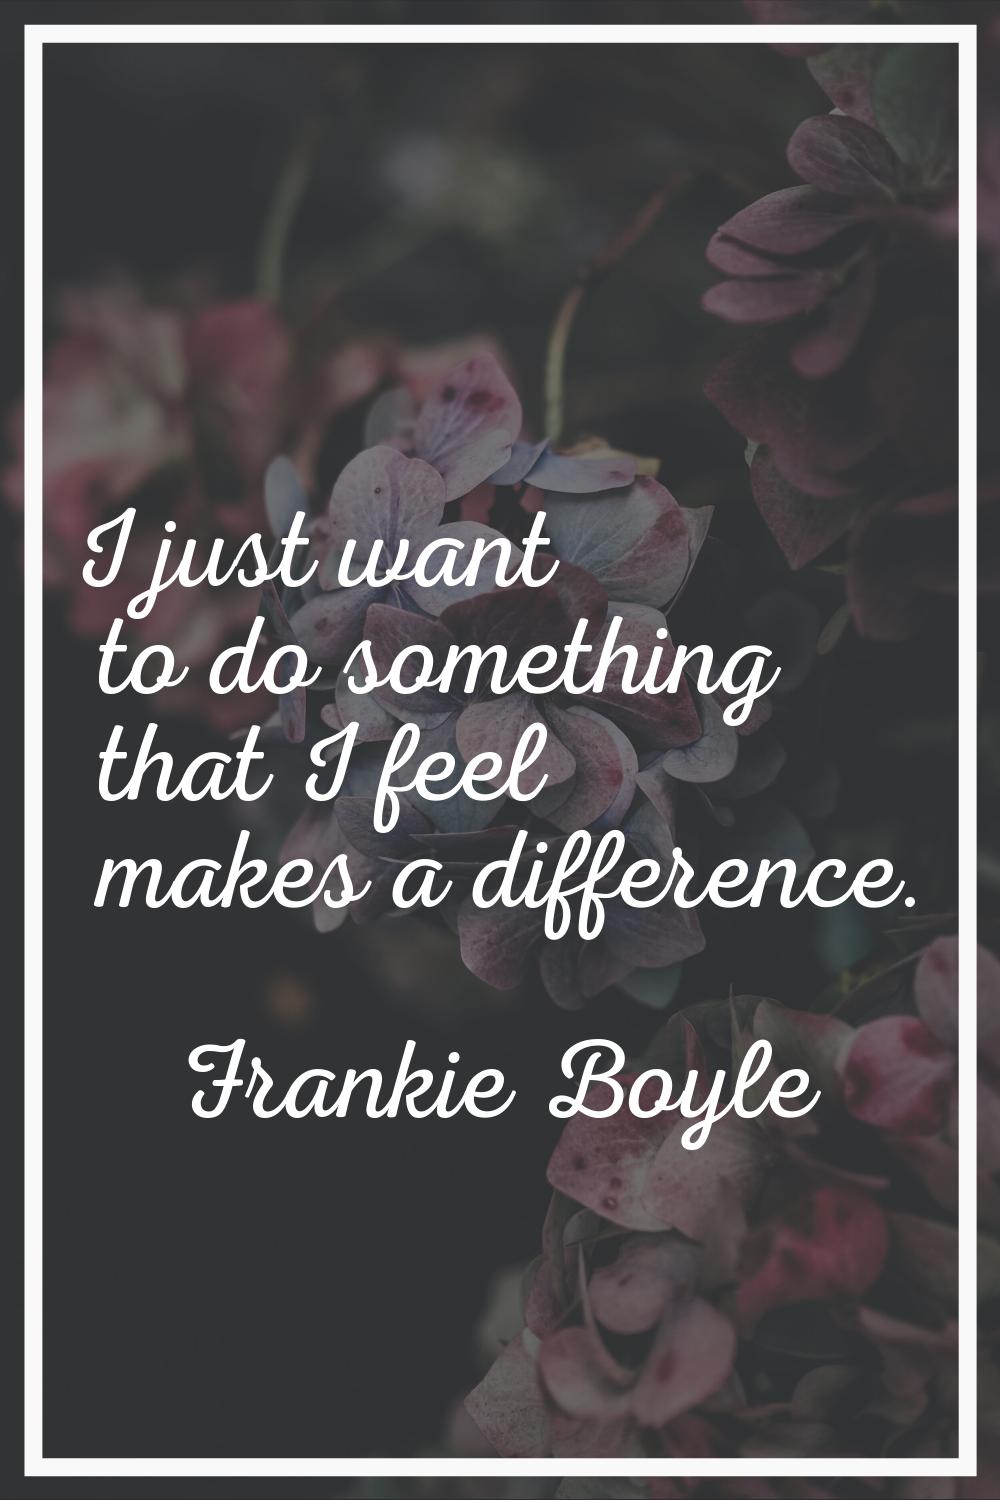 I just want to do something that I feel makes a difference.